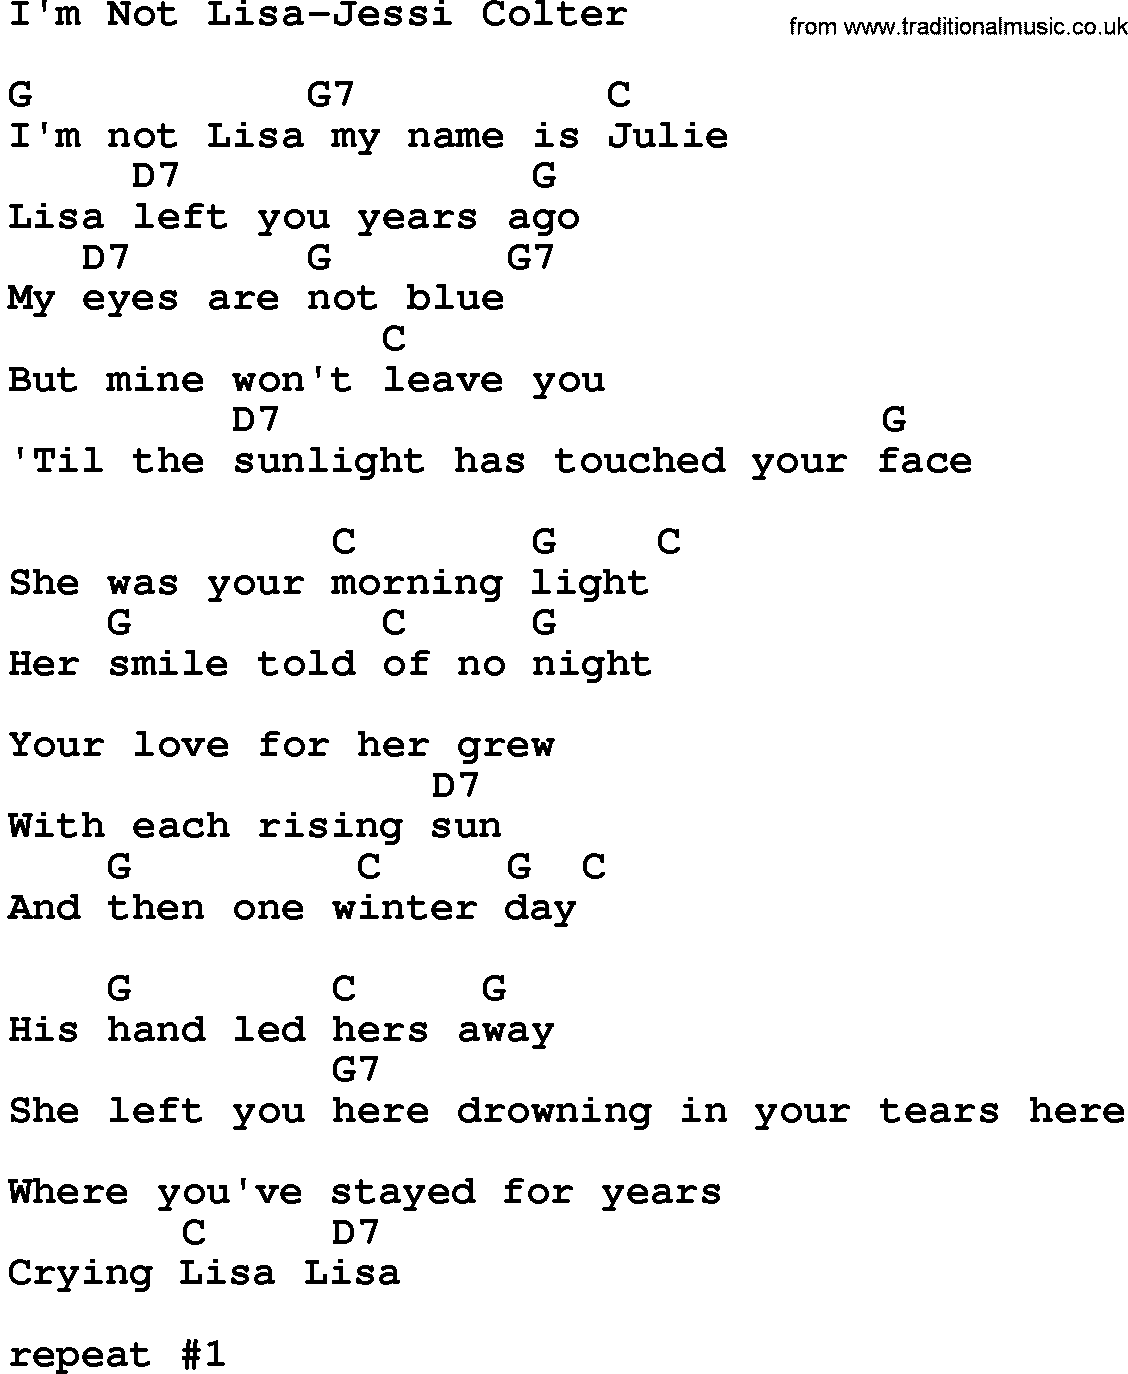 Country music song: I'm Not Lisa-Jessi Colter lyrics and chords